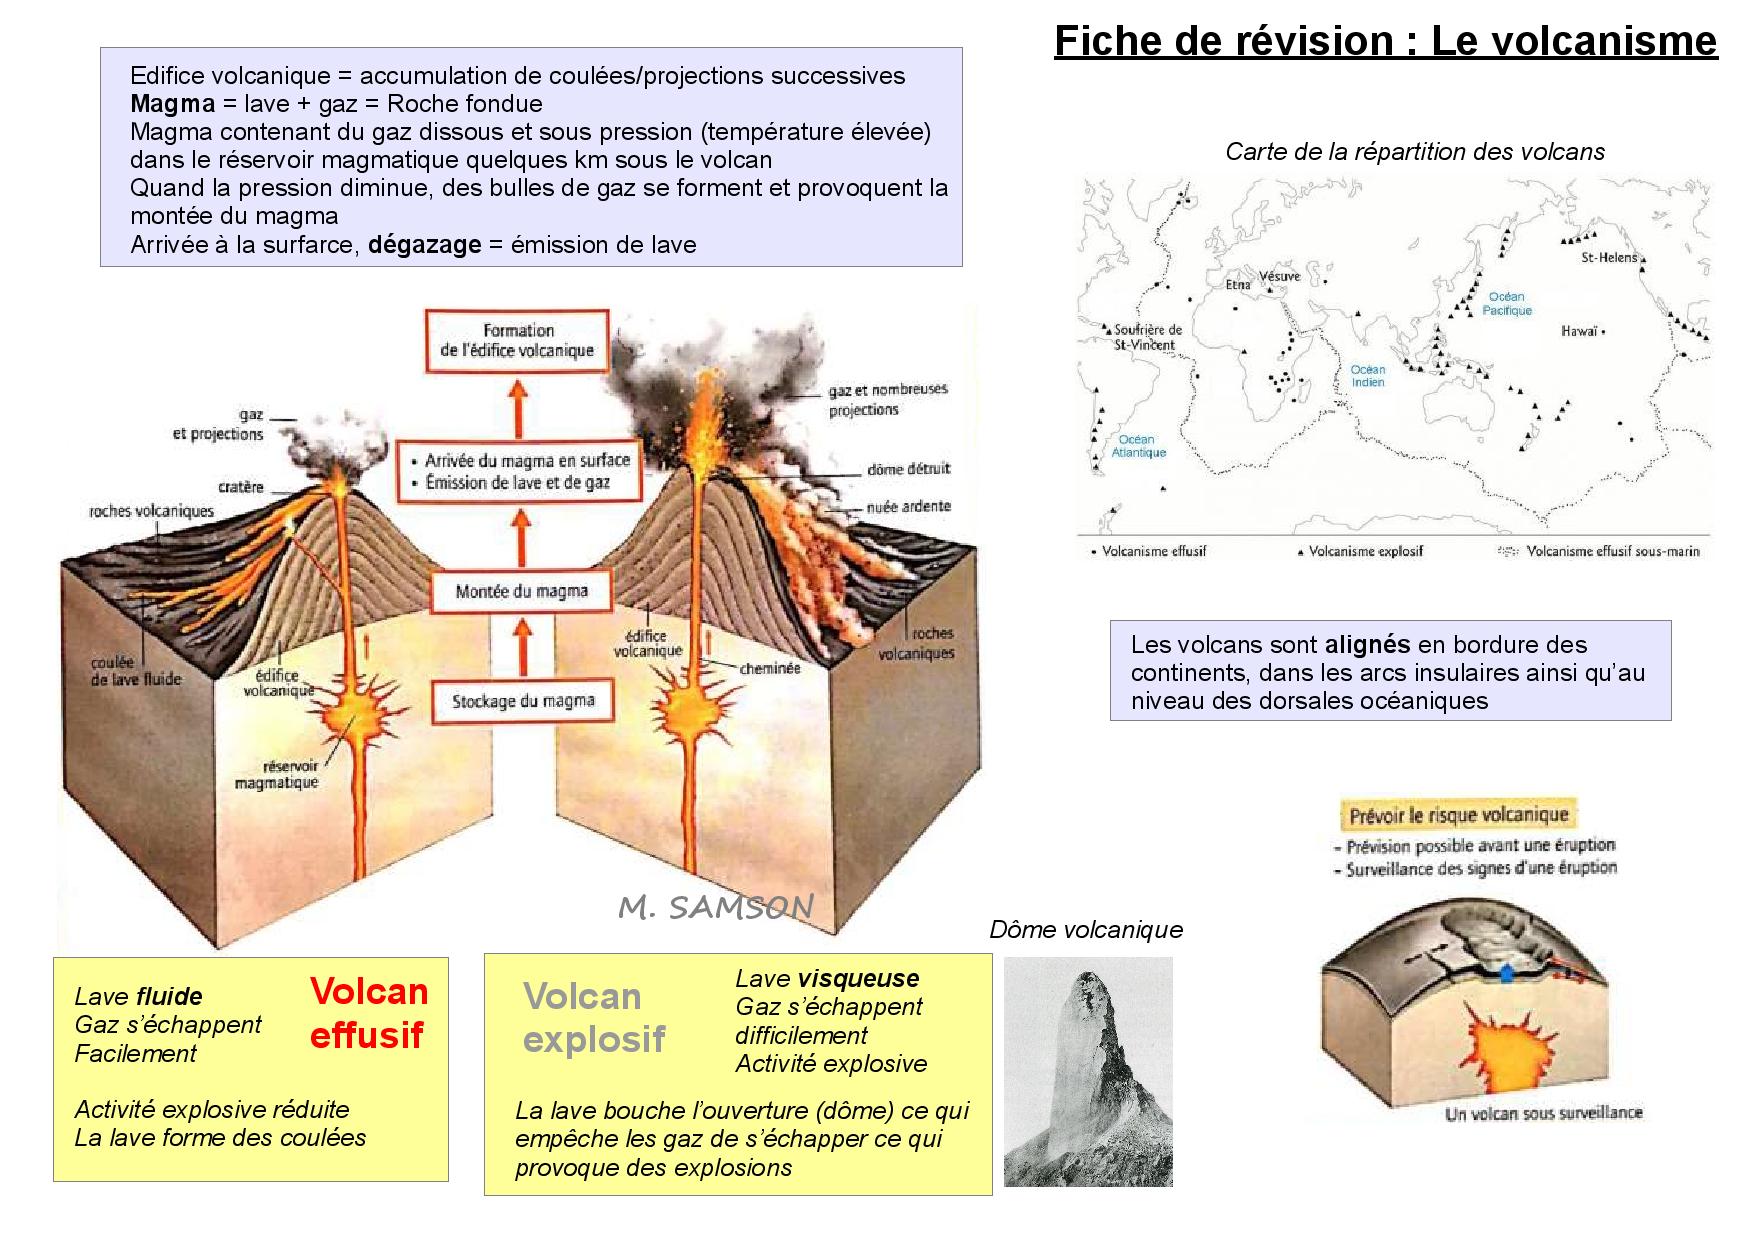 FICHES_REVISIONS_3eme_SAMSON_volcanisme-page-001.jpg